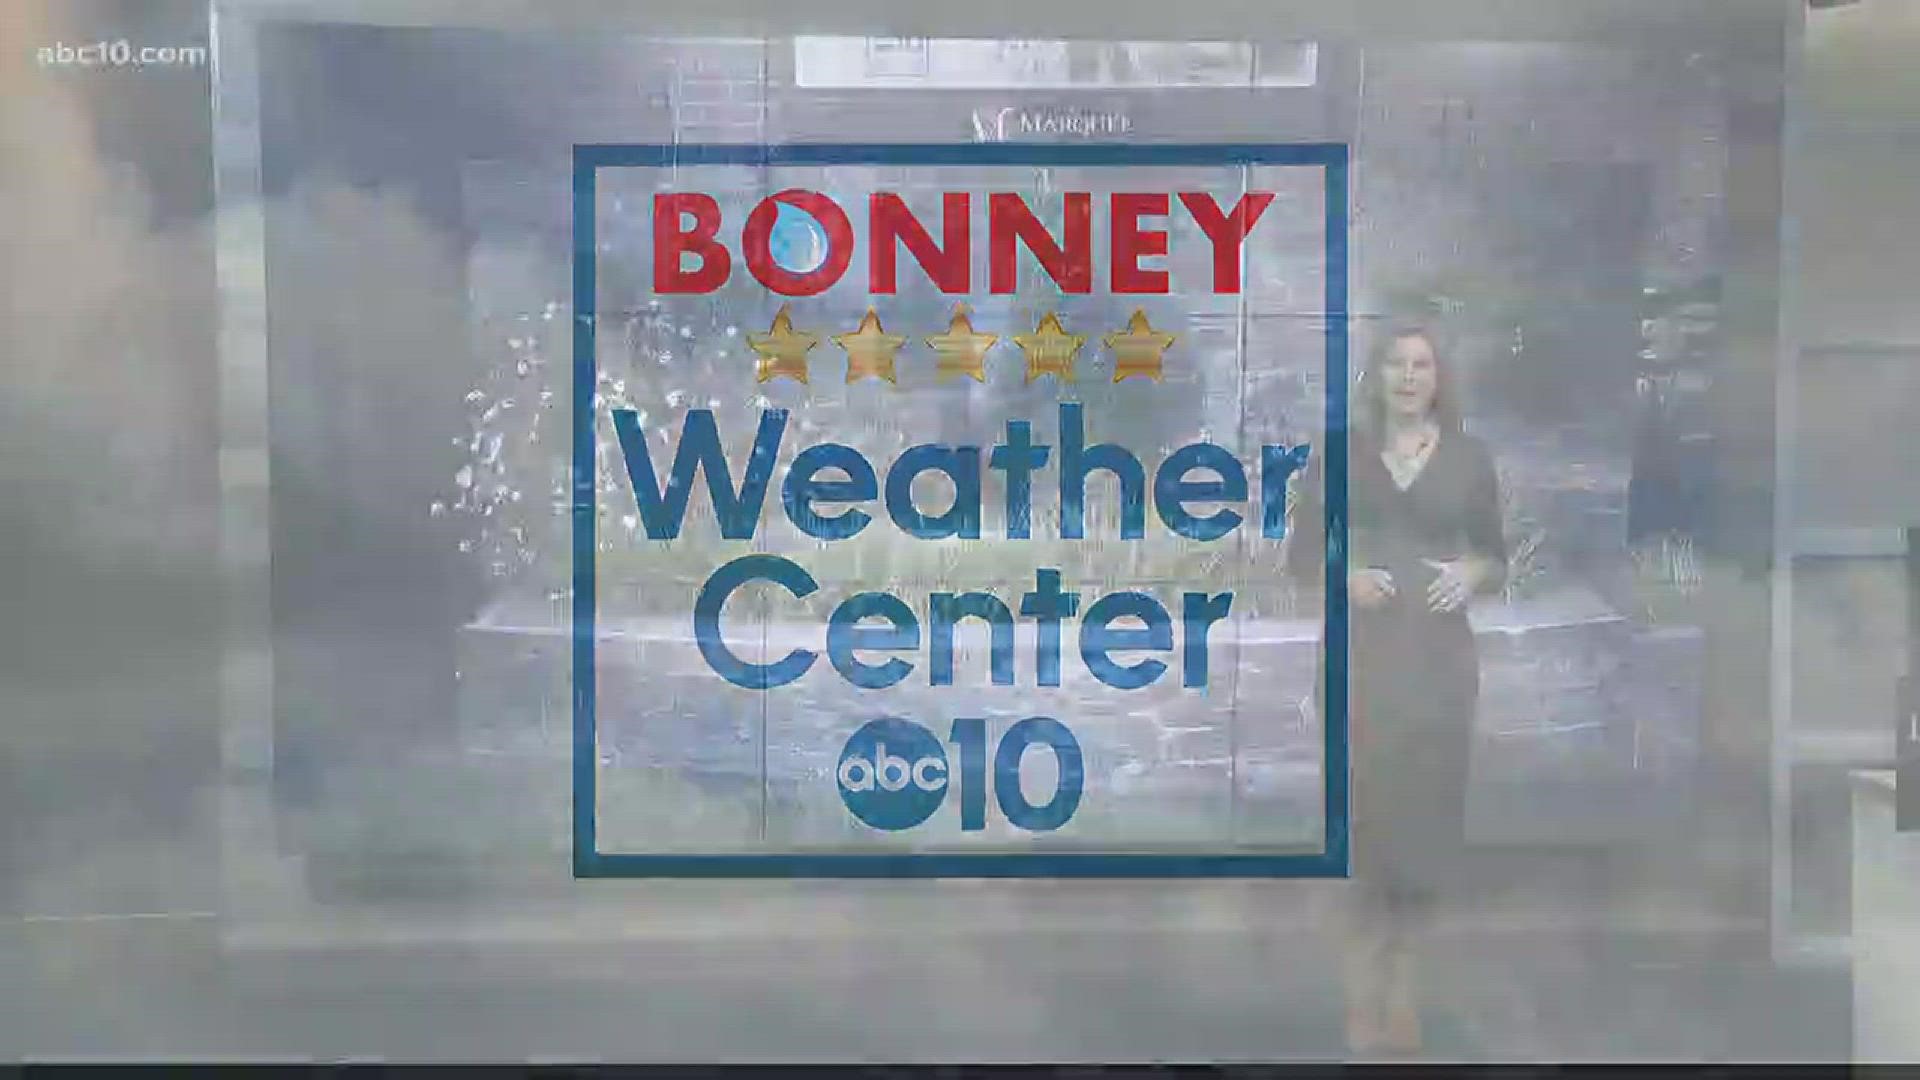 Local 11 p.m. weather: February 15, 2018